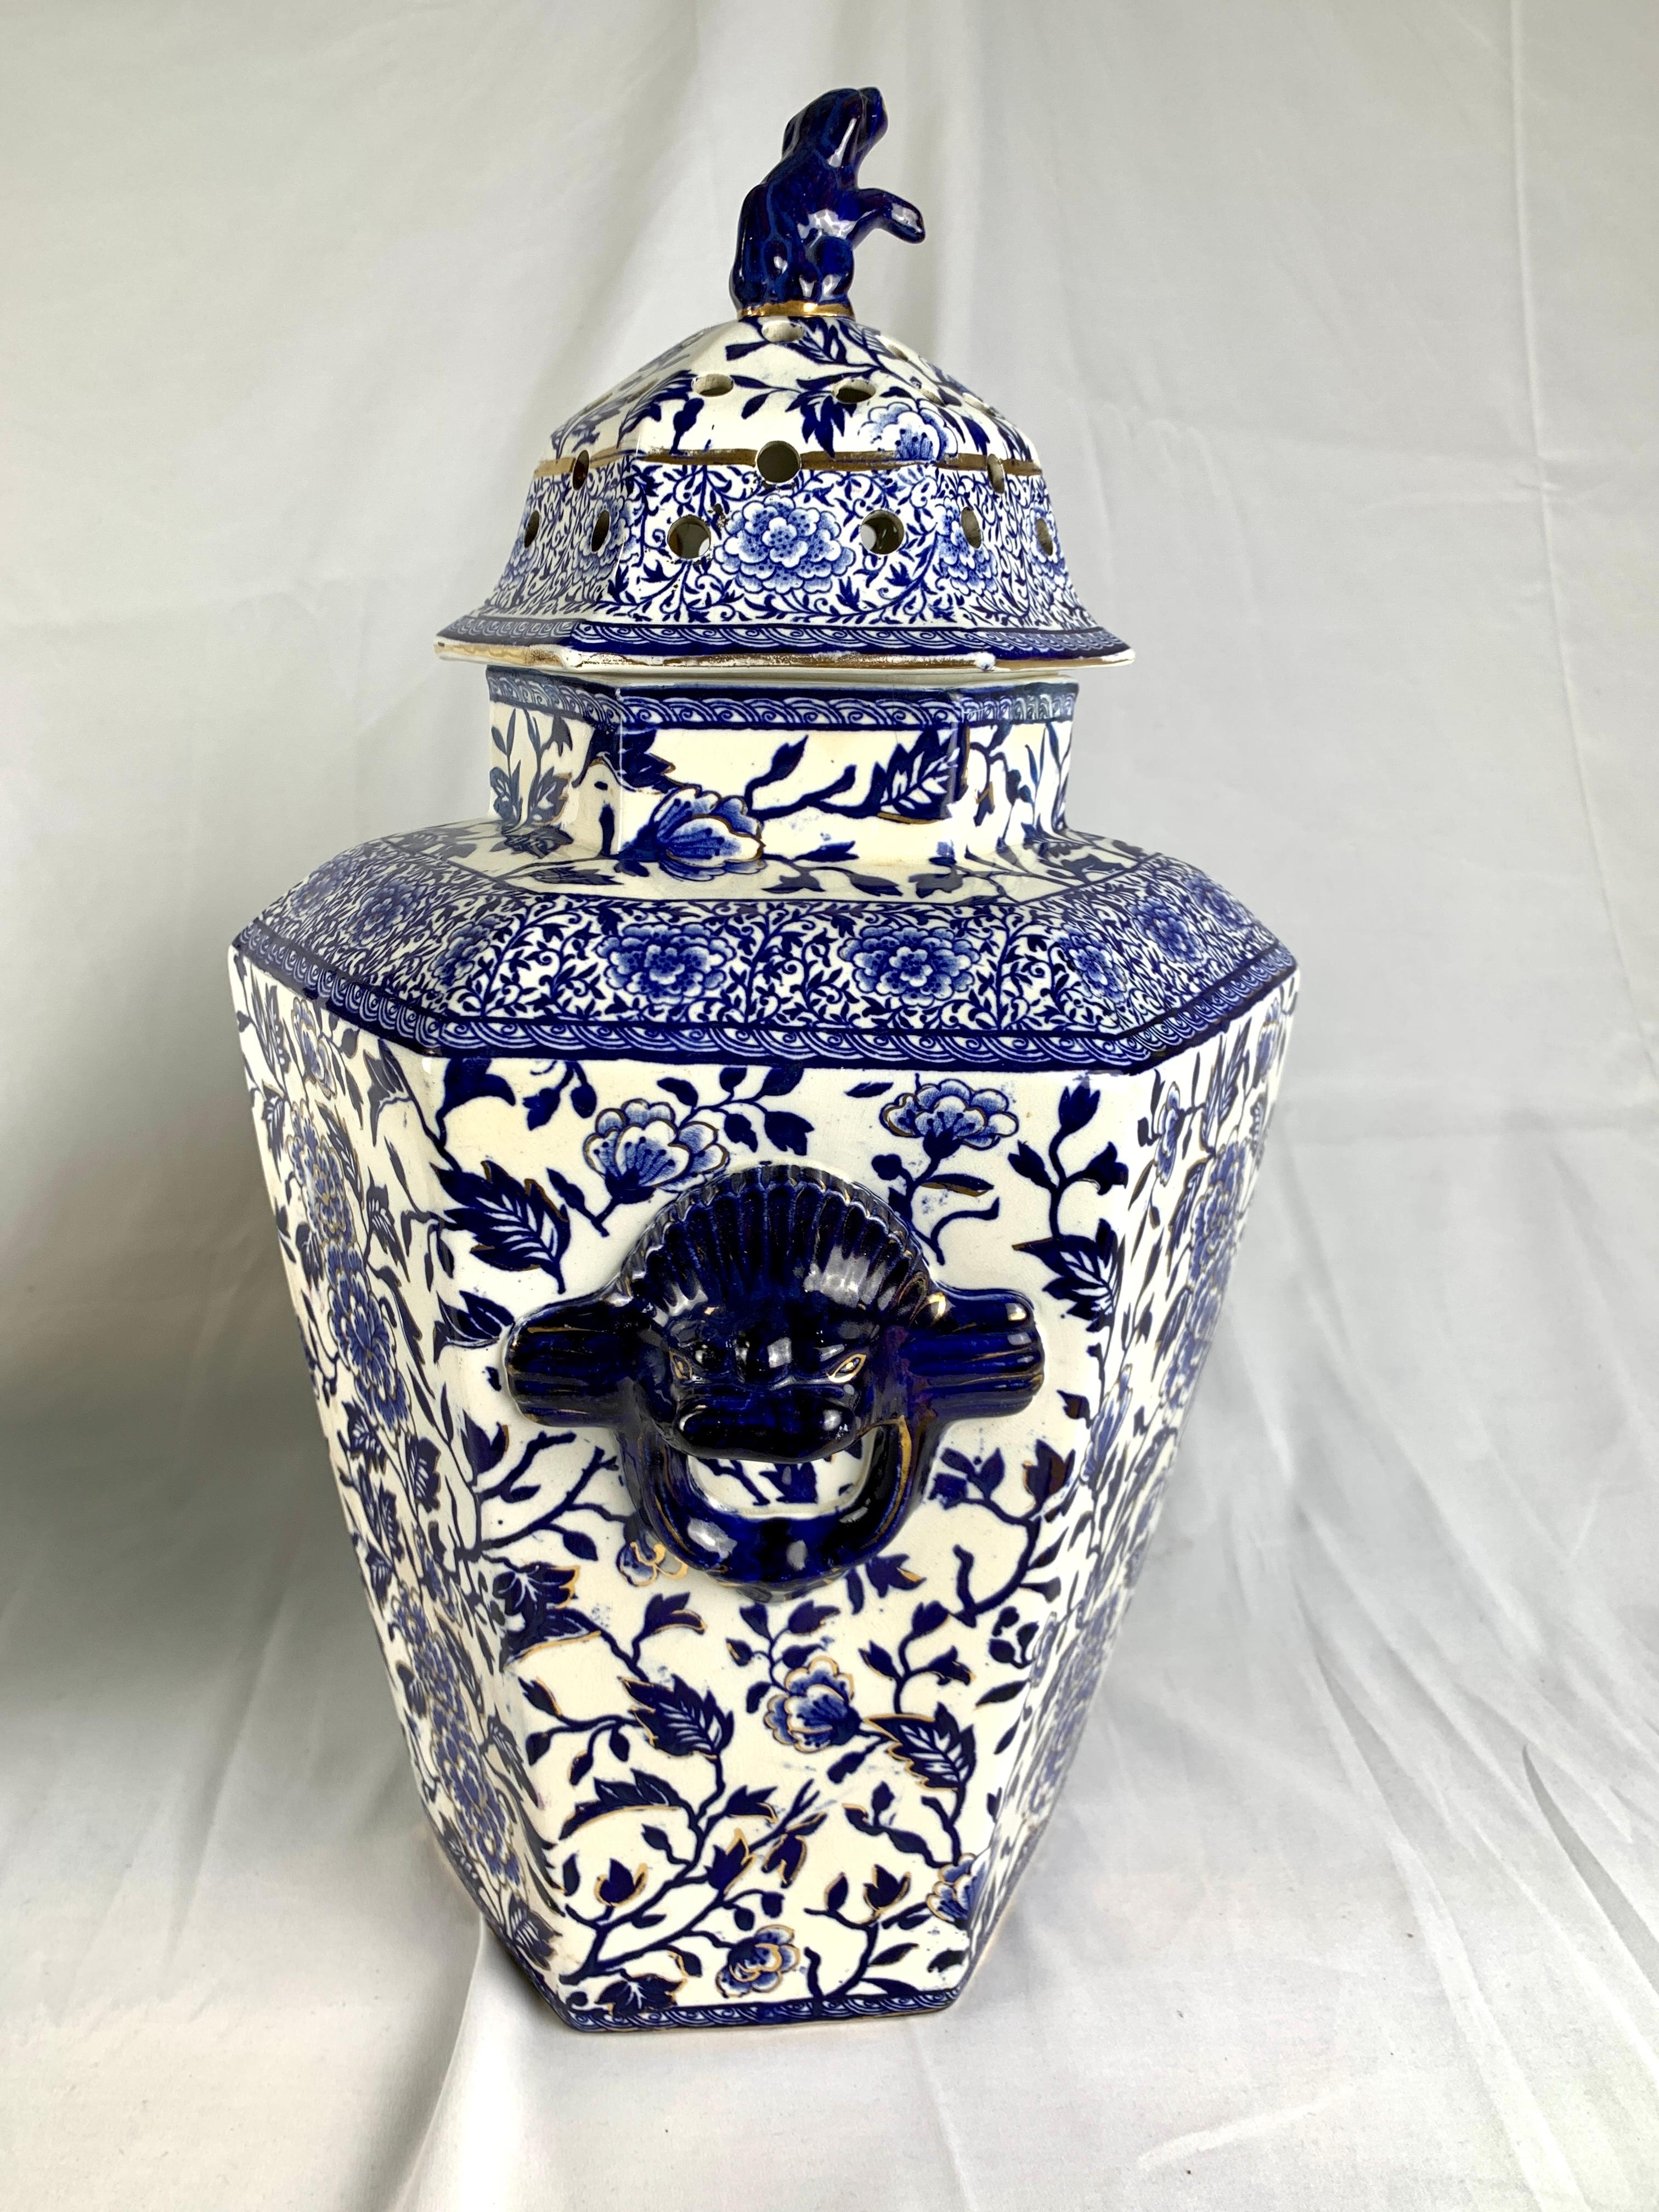 This pair of large blue and white hexagonal jars is exquisite.
Made in England circa 1825 with 18.5